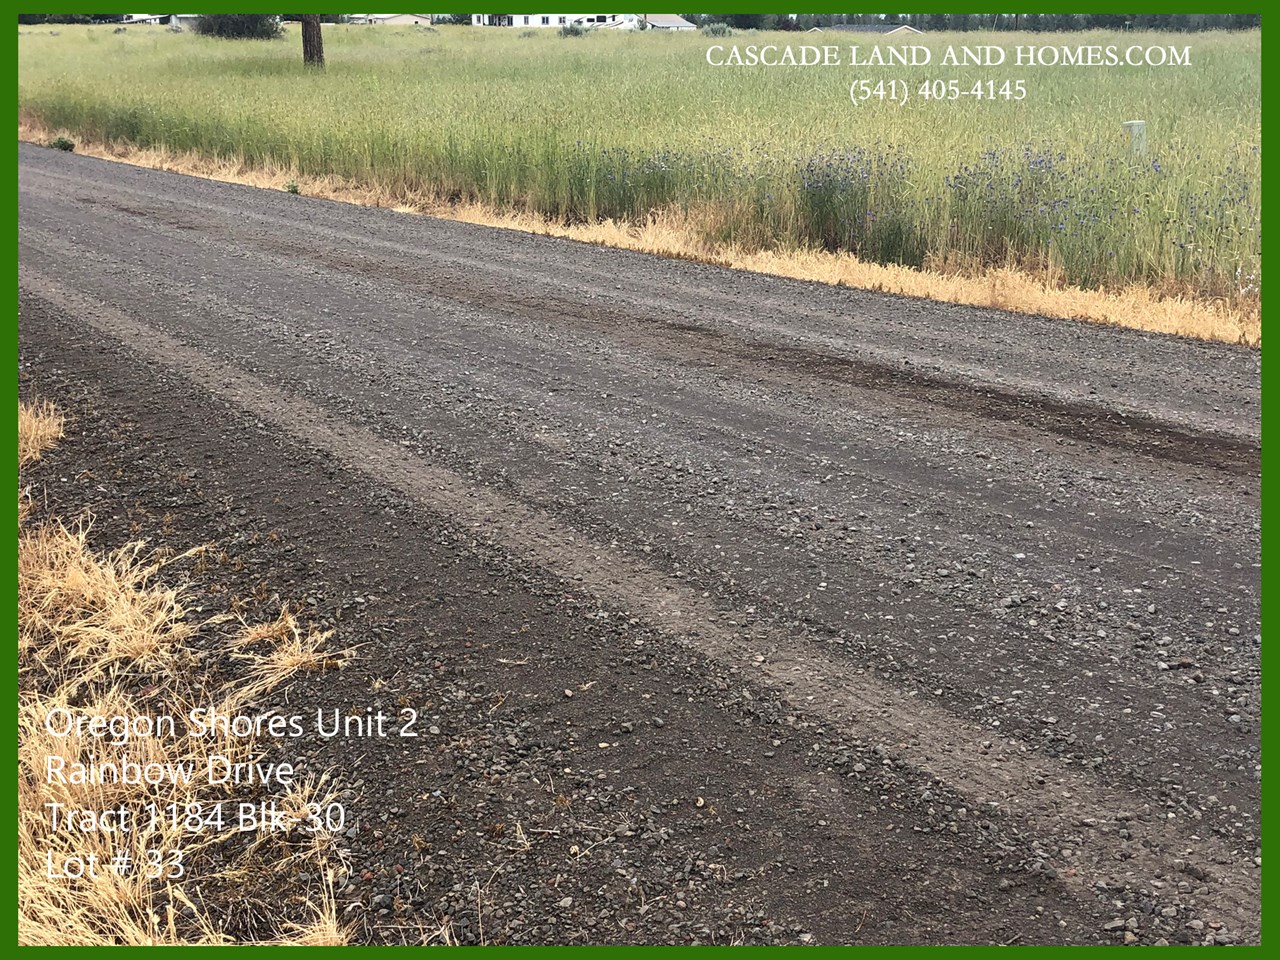 the roads are well maintained compacted gravel, maintenance is  included in your low yearly hoa fees.